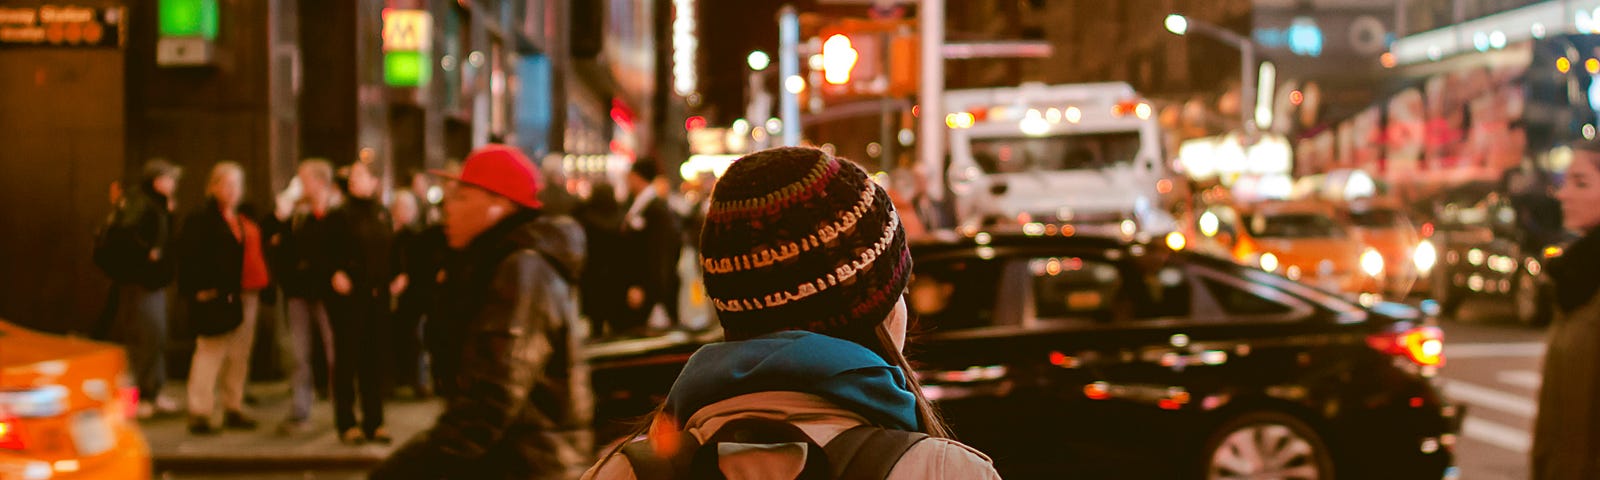 Traveller with cap and packsack in the city.